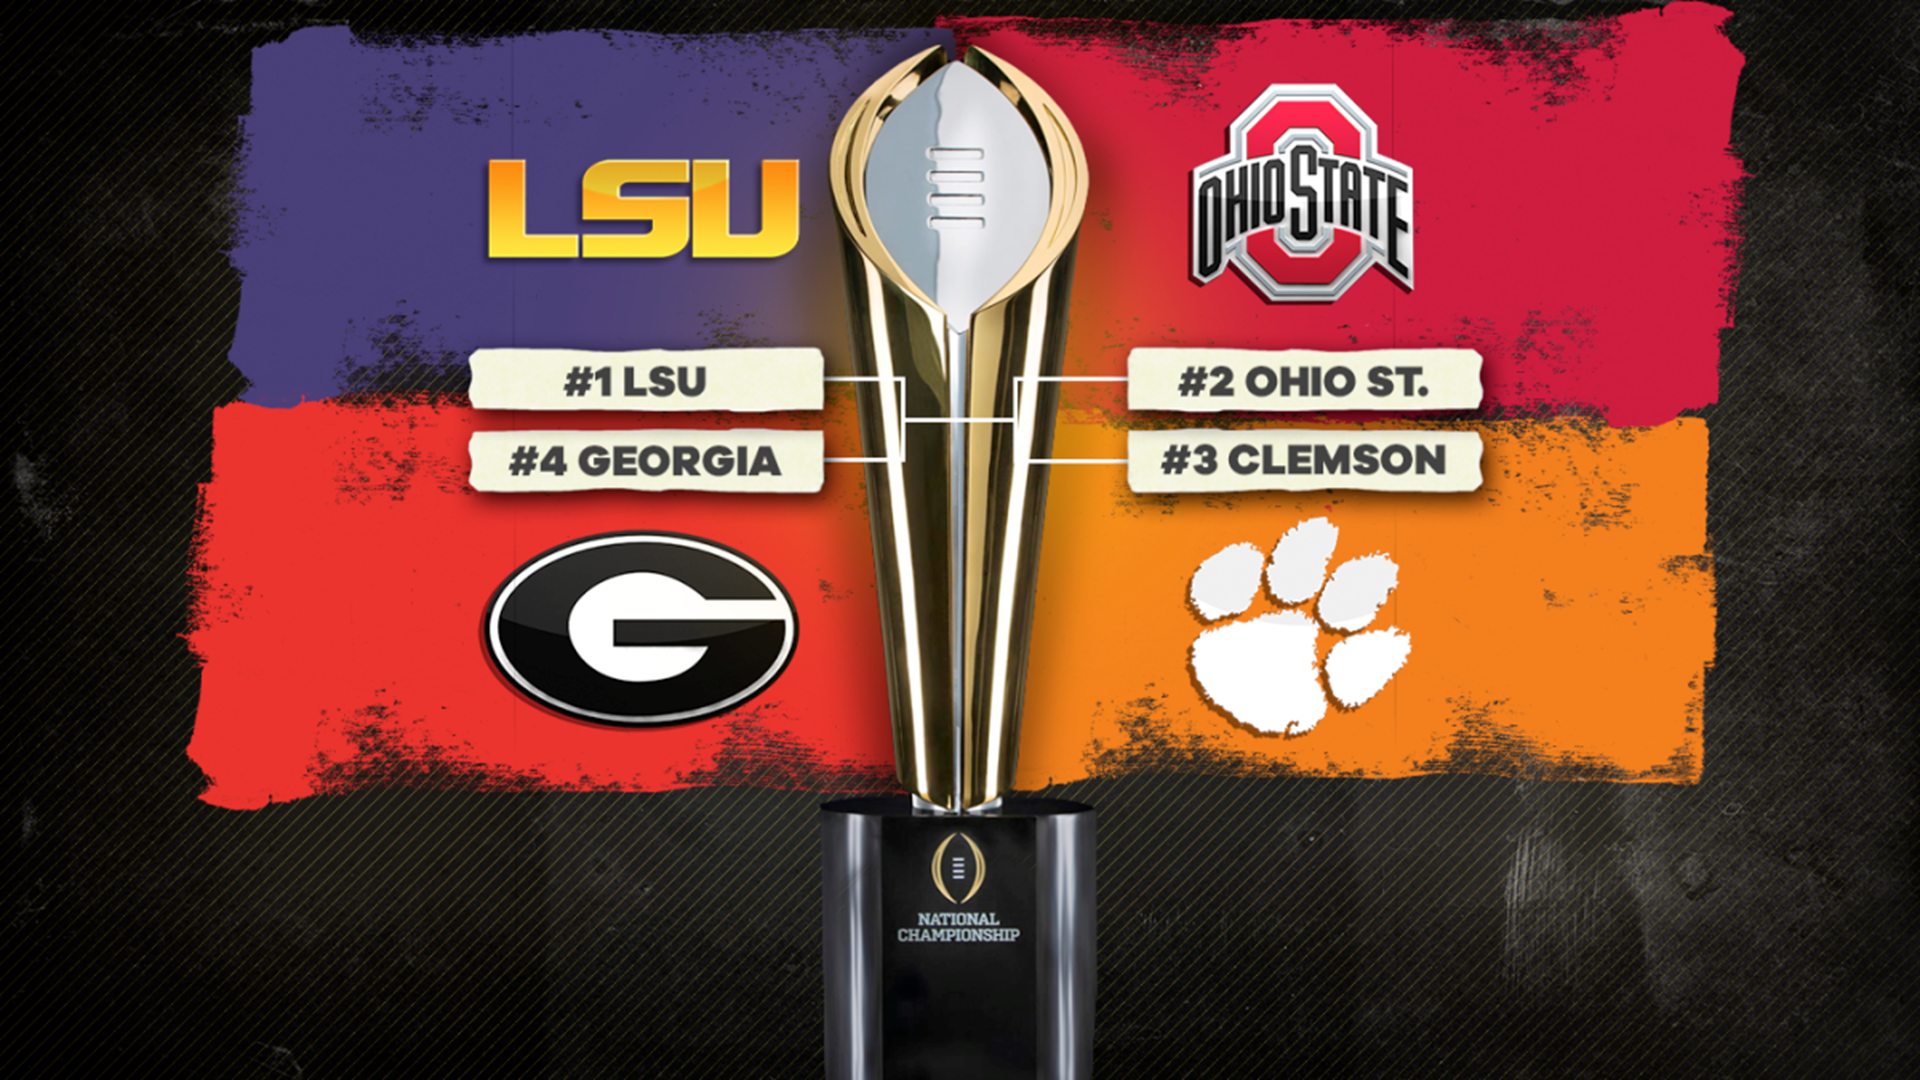 College Football Championship games will be played this weekend